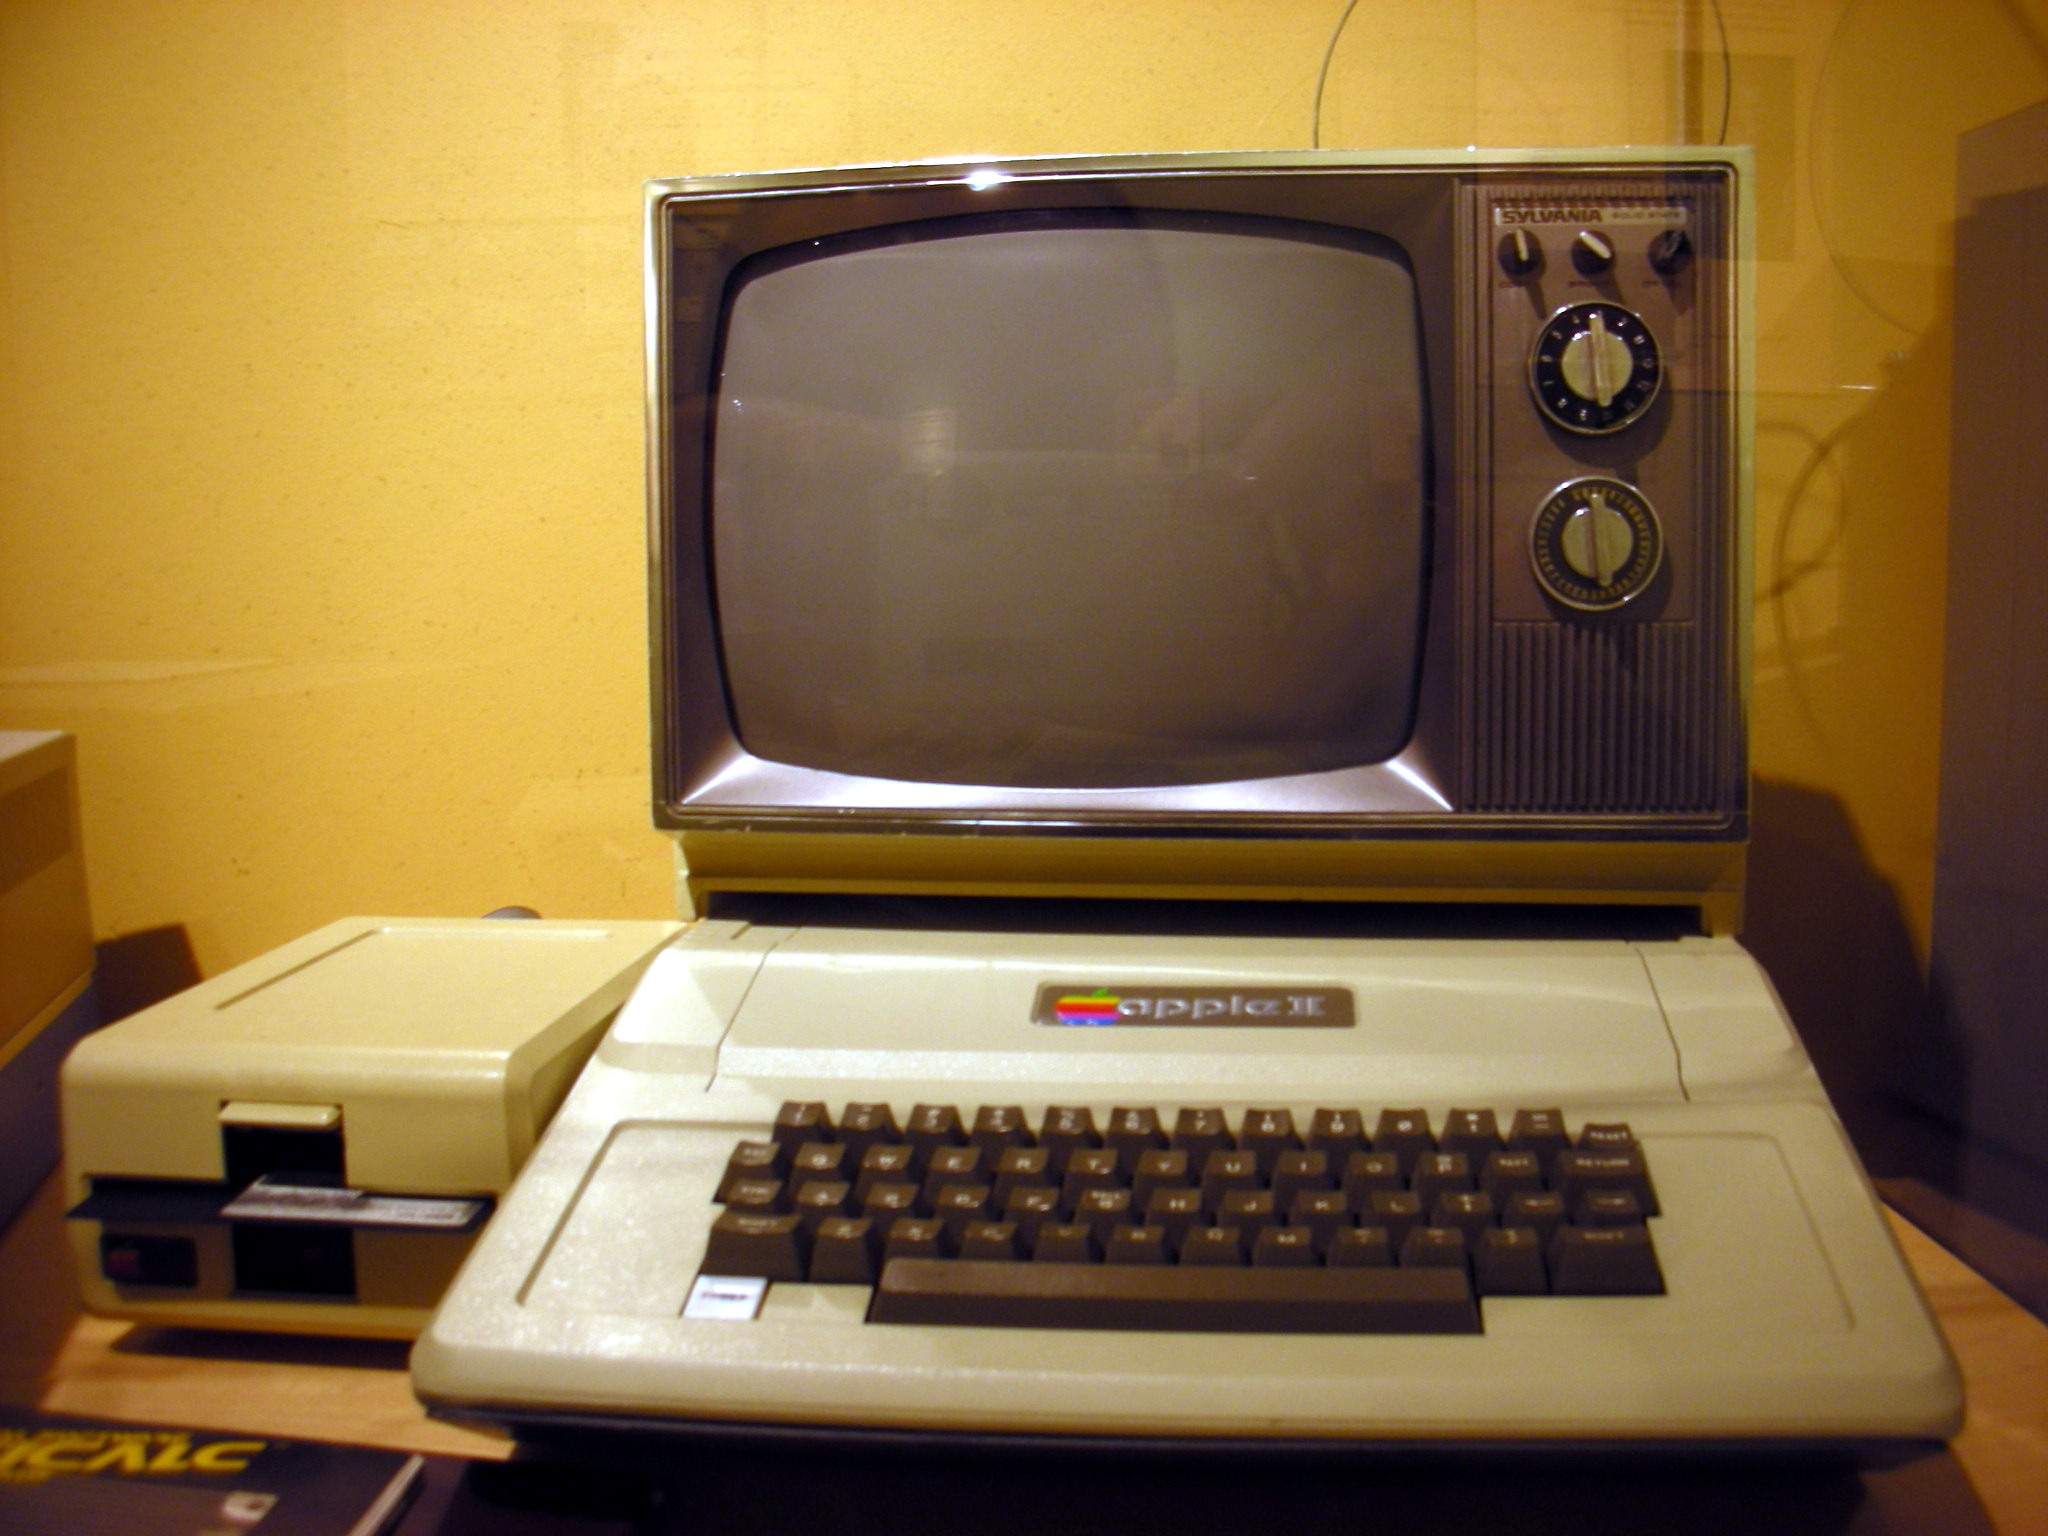 Apple II - One of the first personal computers